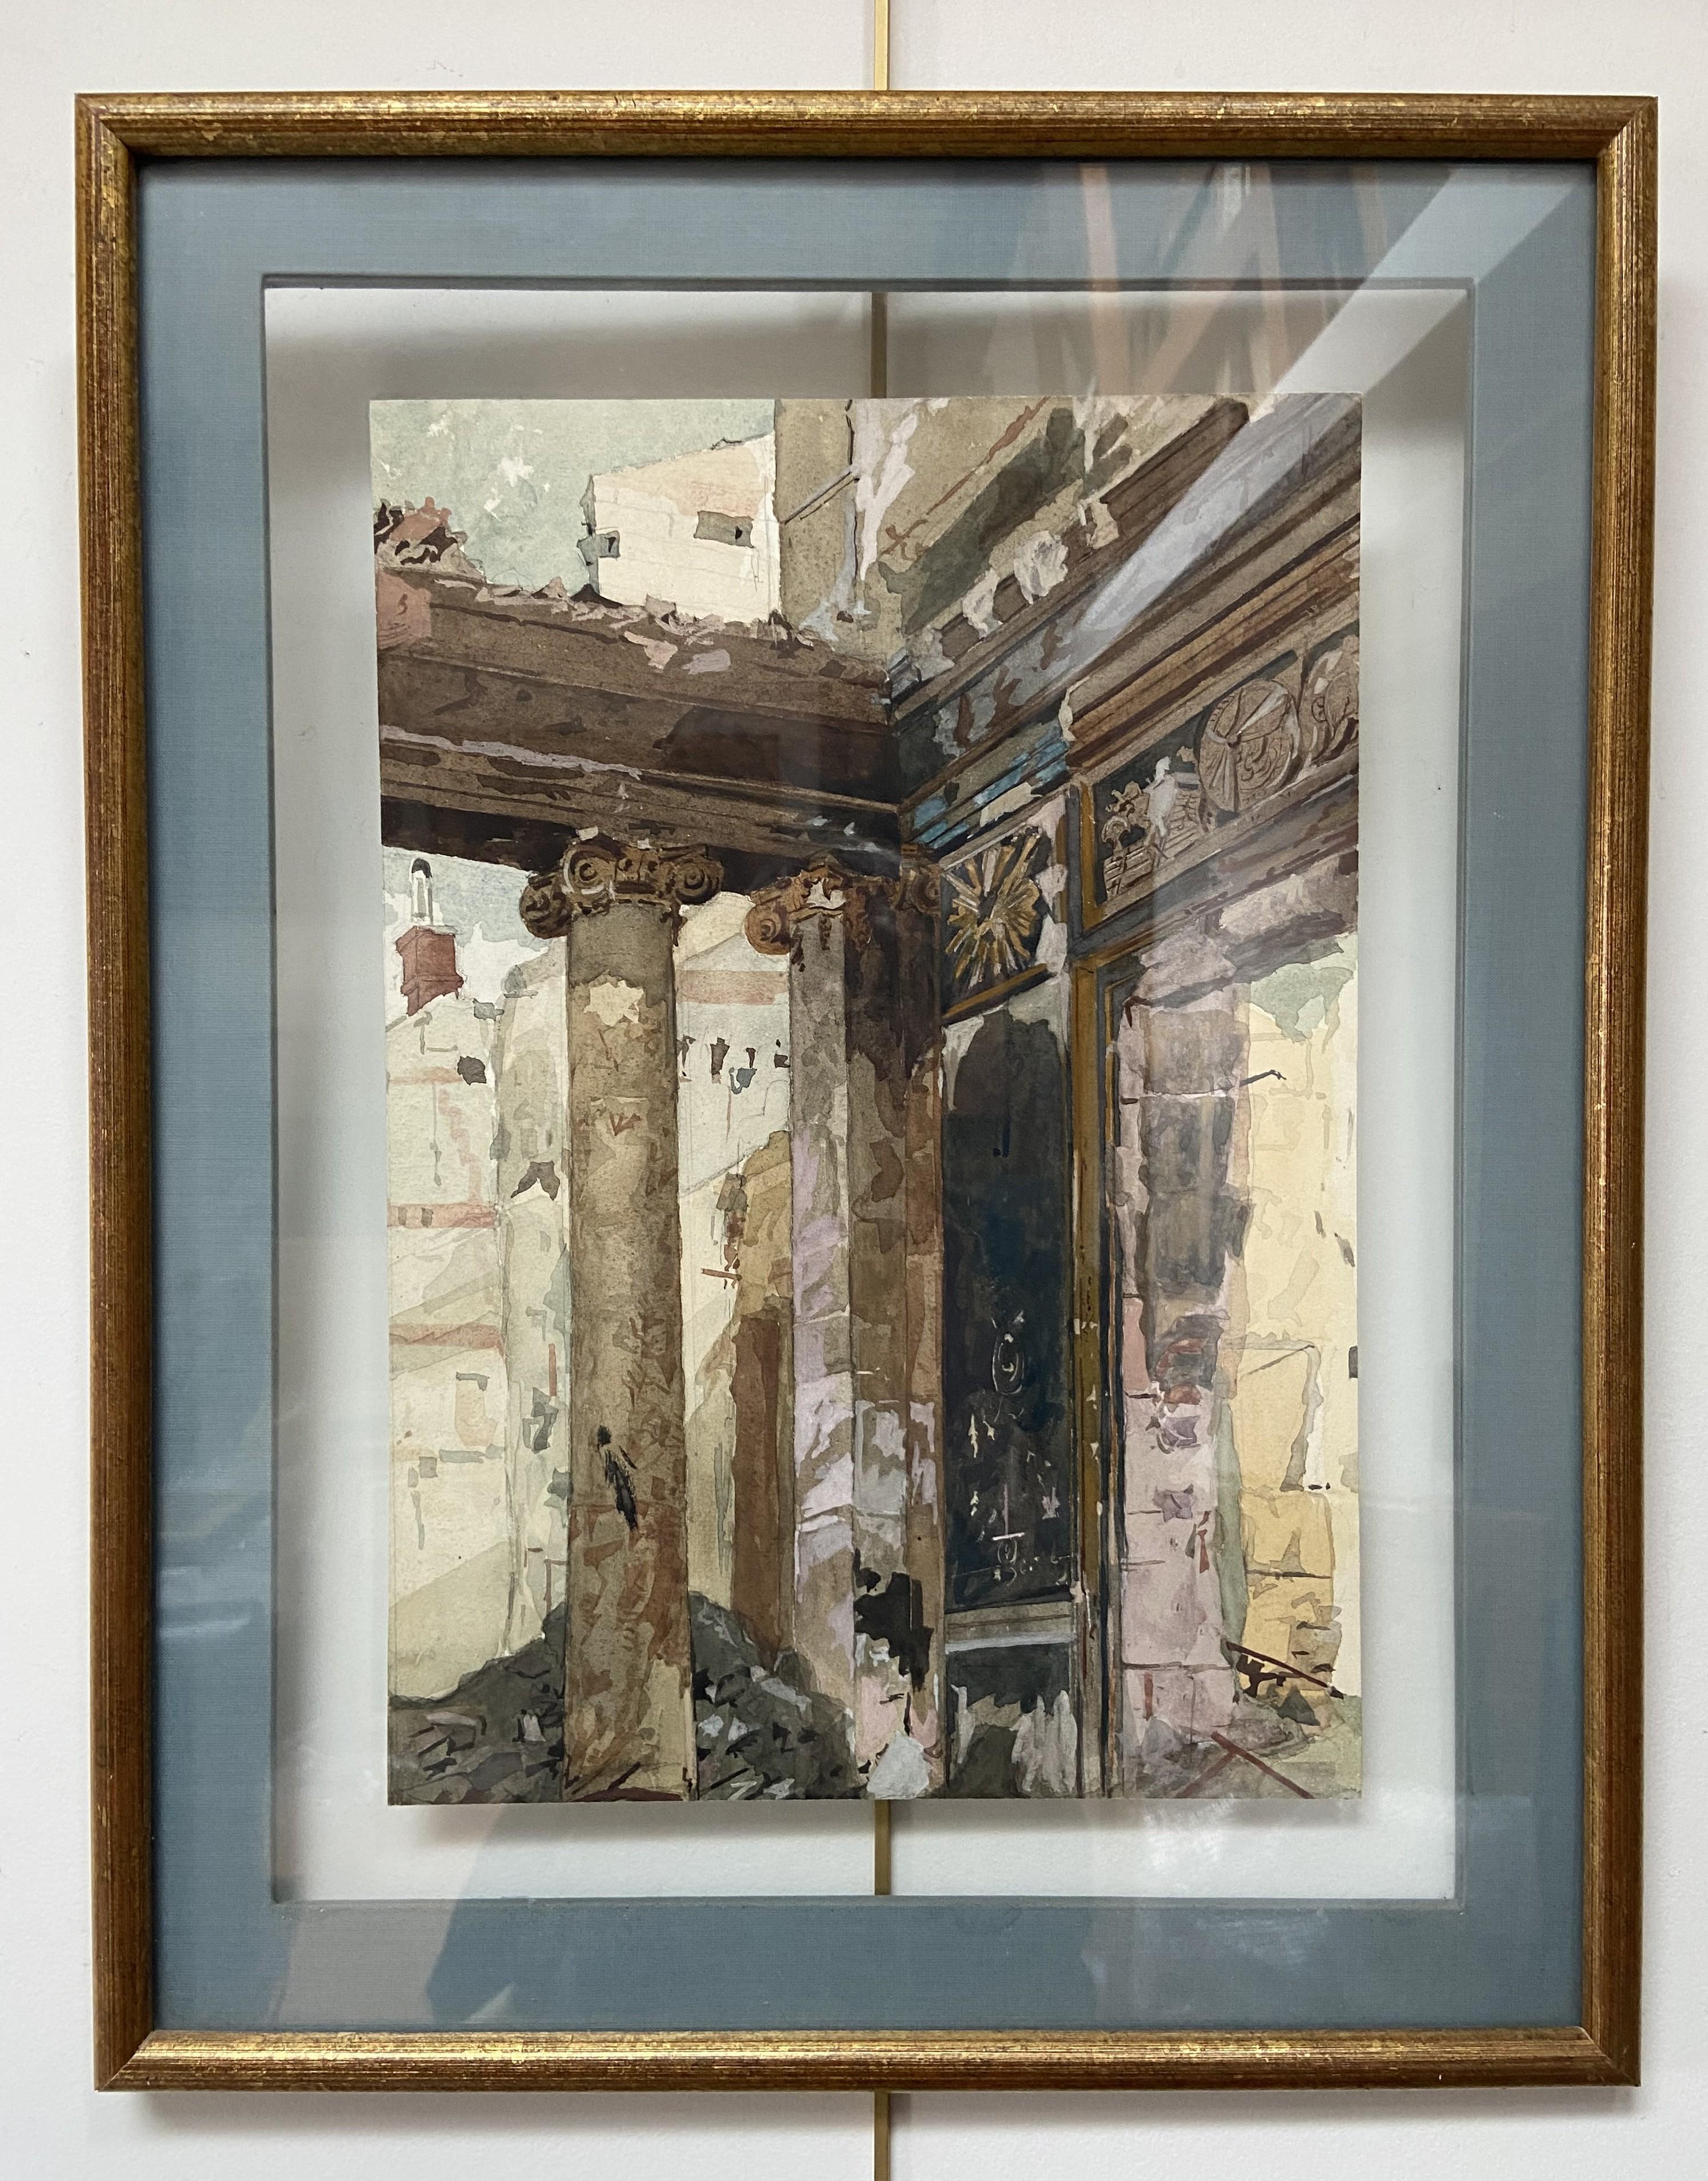 20th century French school, Colonnade in ruins, watercolor - Art by Unknown